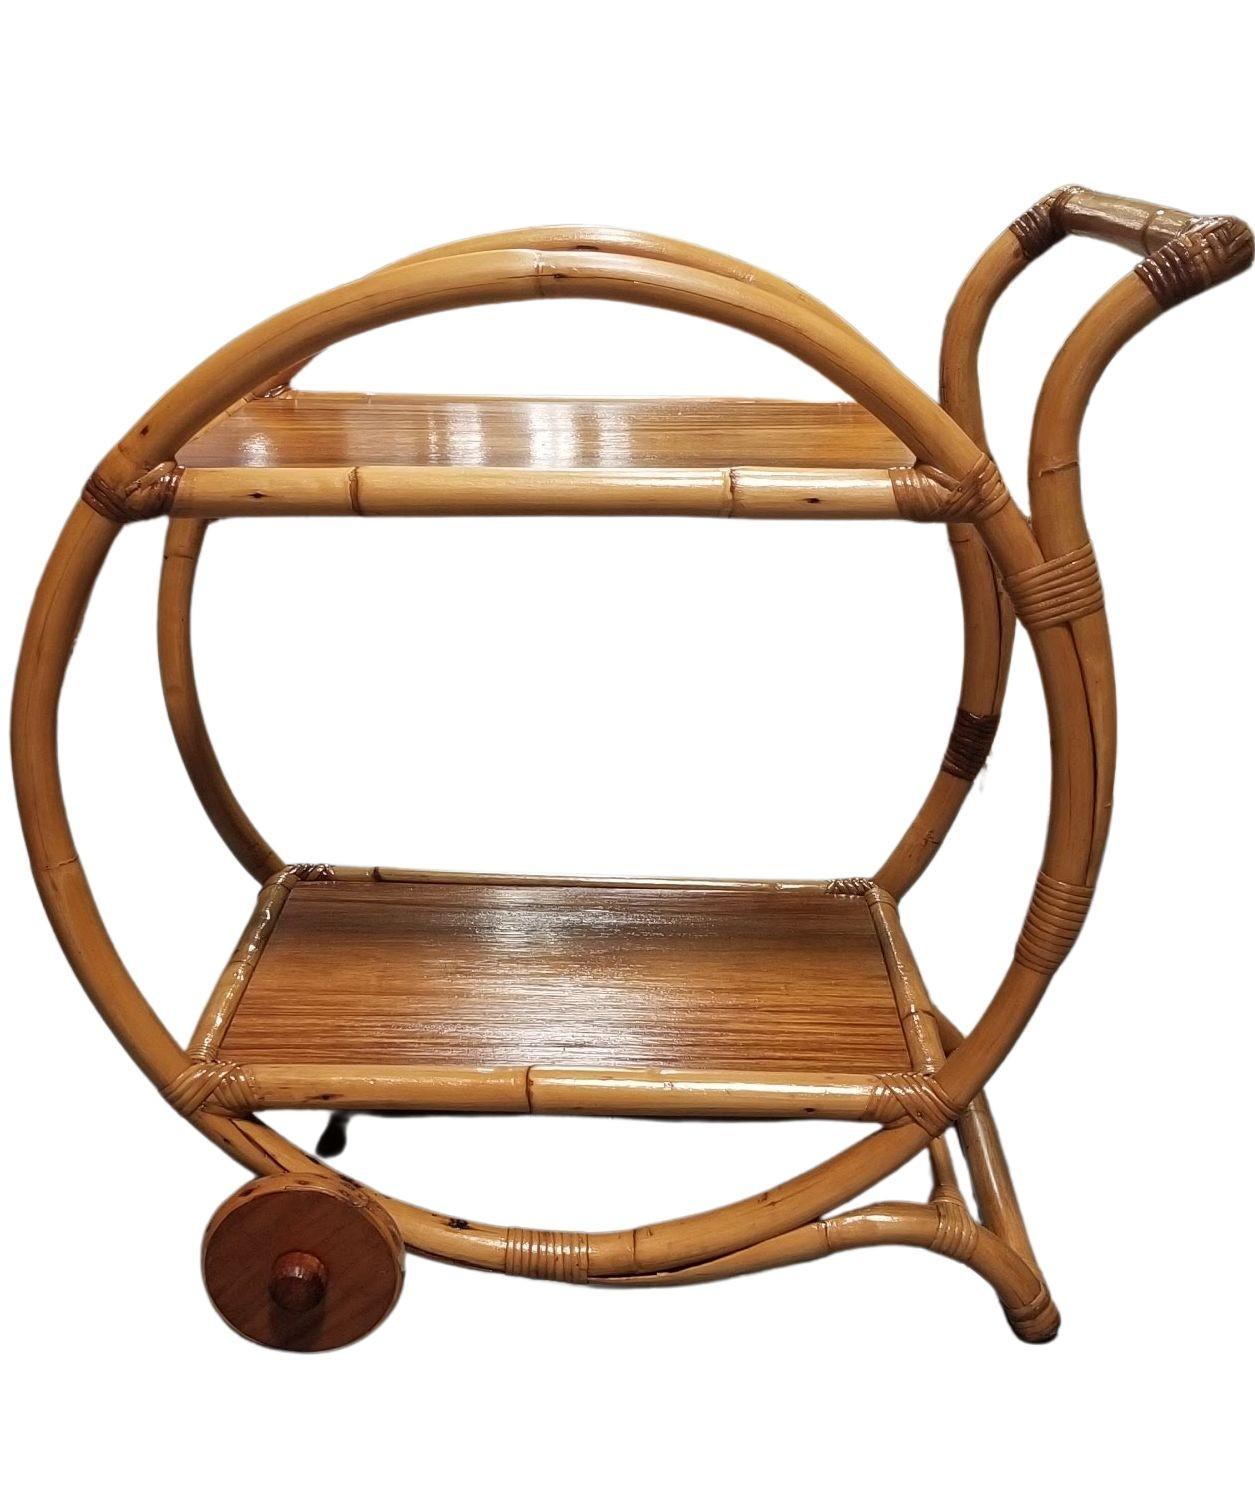 Restored single-strand rattan bar cart or tea cart with a top handle and front wheels. The bar cart features a large circular that loops the entire circumference of the bar cart. The cart fits in perfectly with the Paul Frankl based mid-century